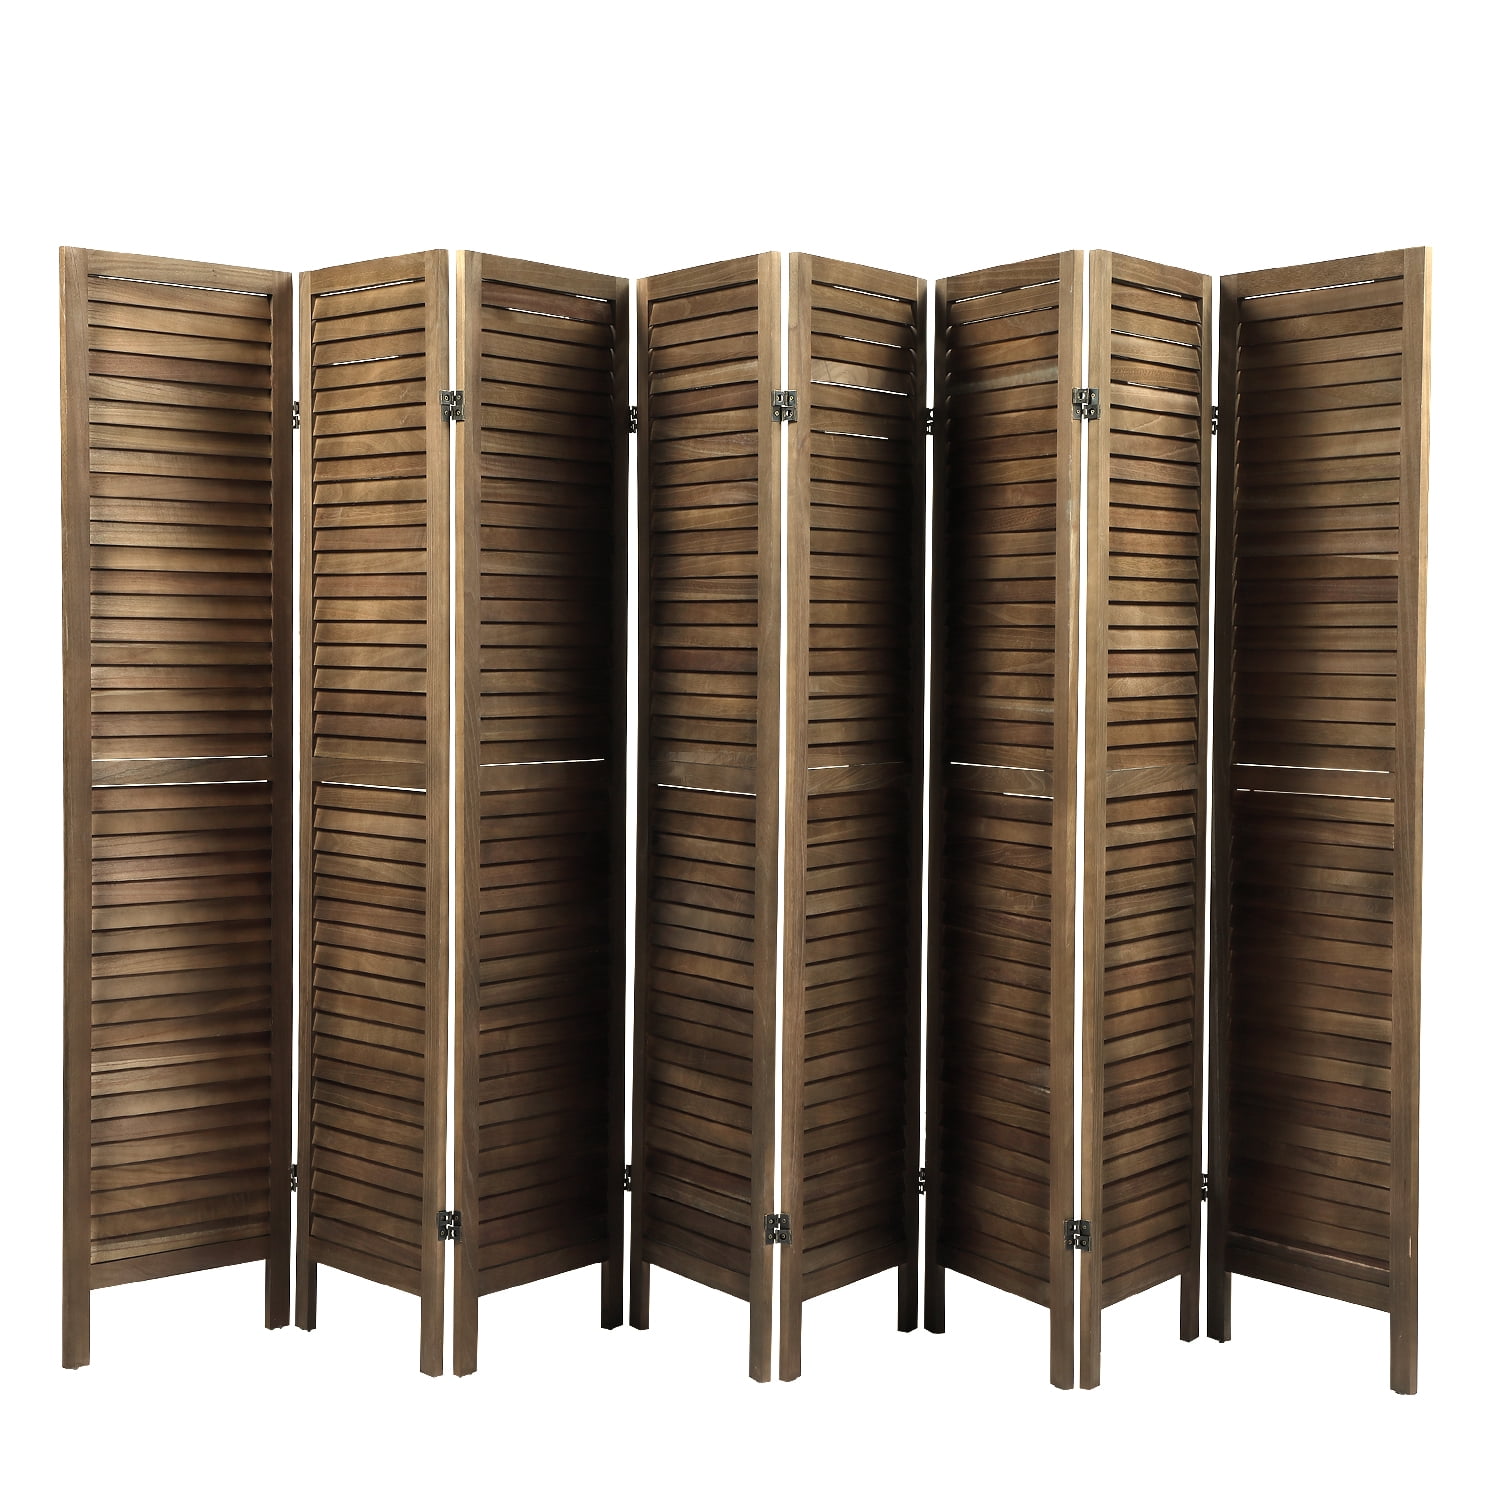 Details about   Decorative Folding Screen room divider partition Spanish wall privacy a-A-0085-z-c show original title 